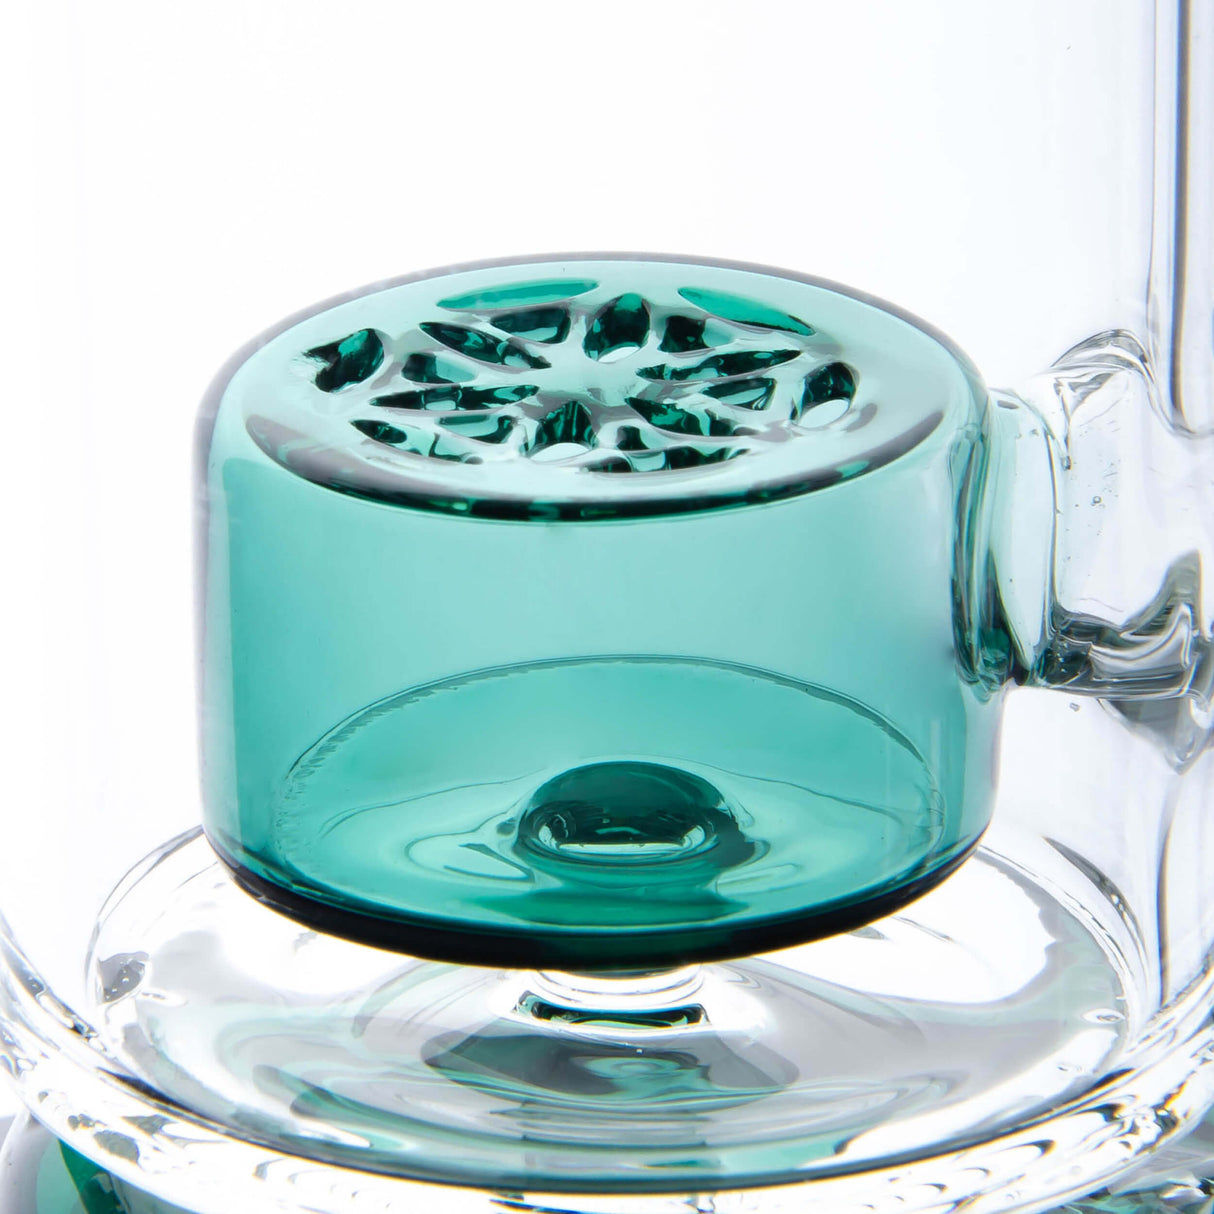 Calibear Straight Fab Puffco Attachment in teal, close-up side view on clear glass